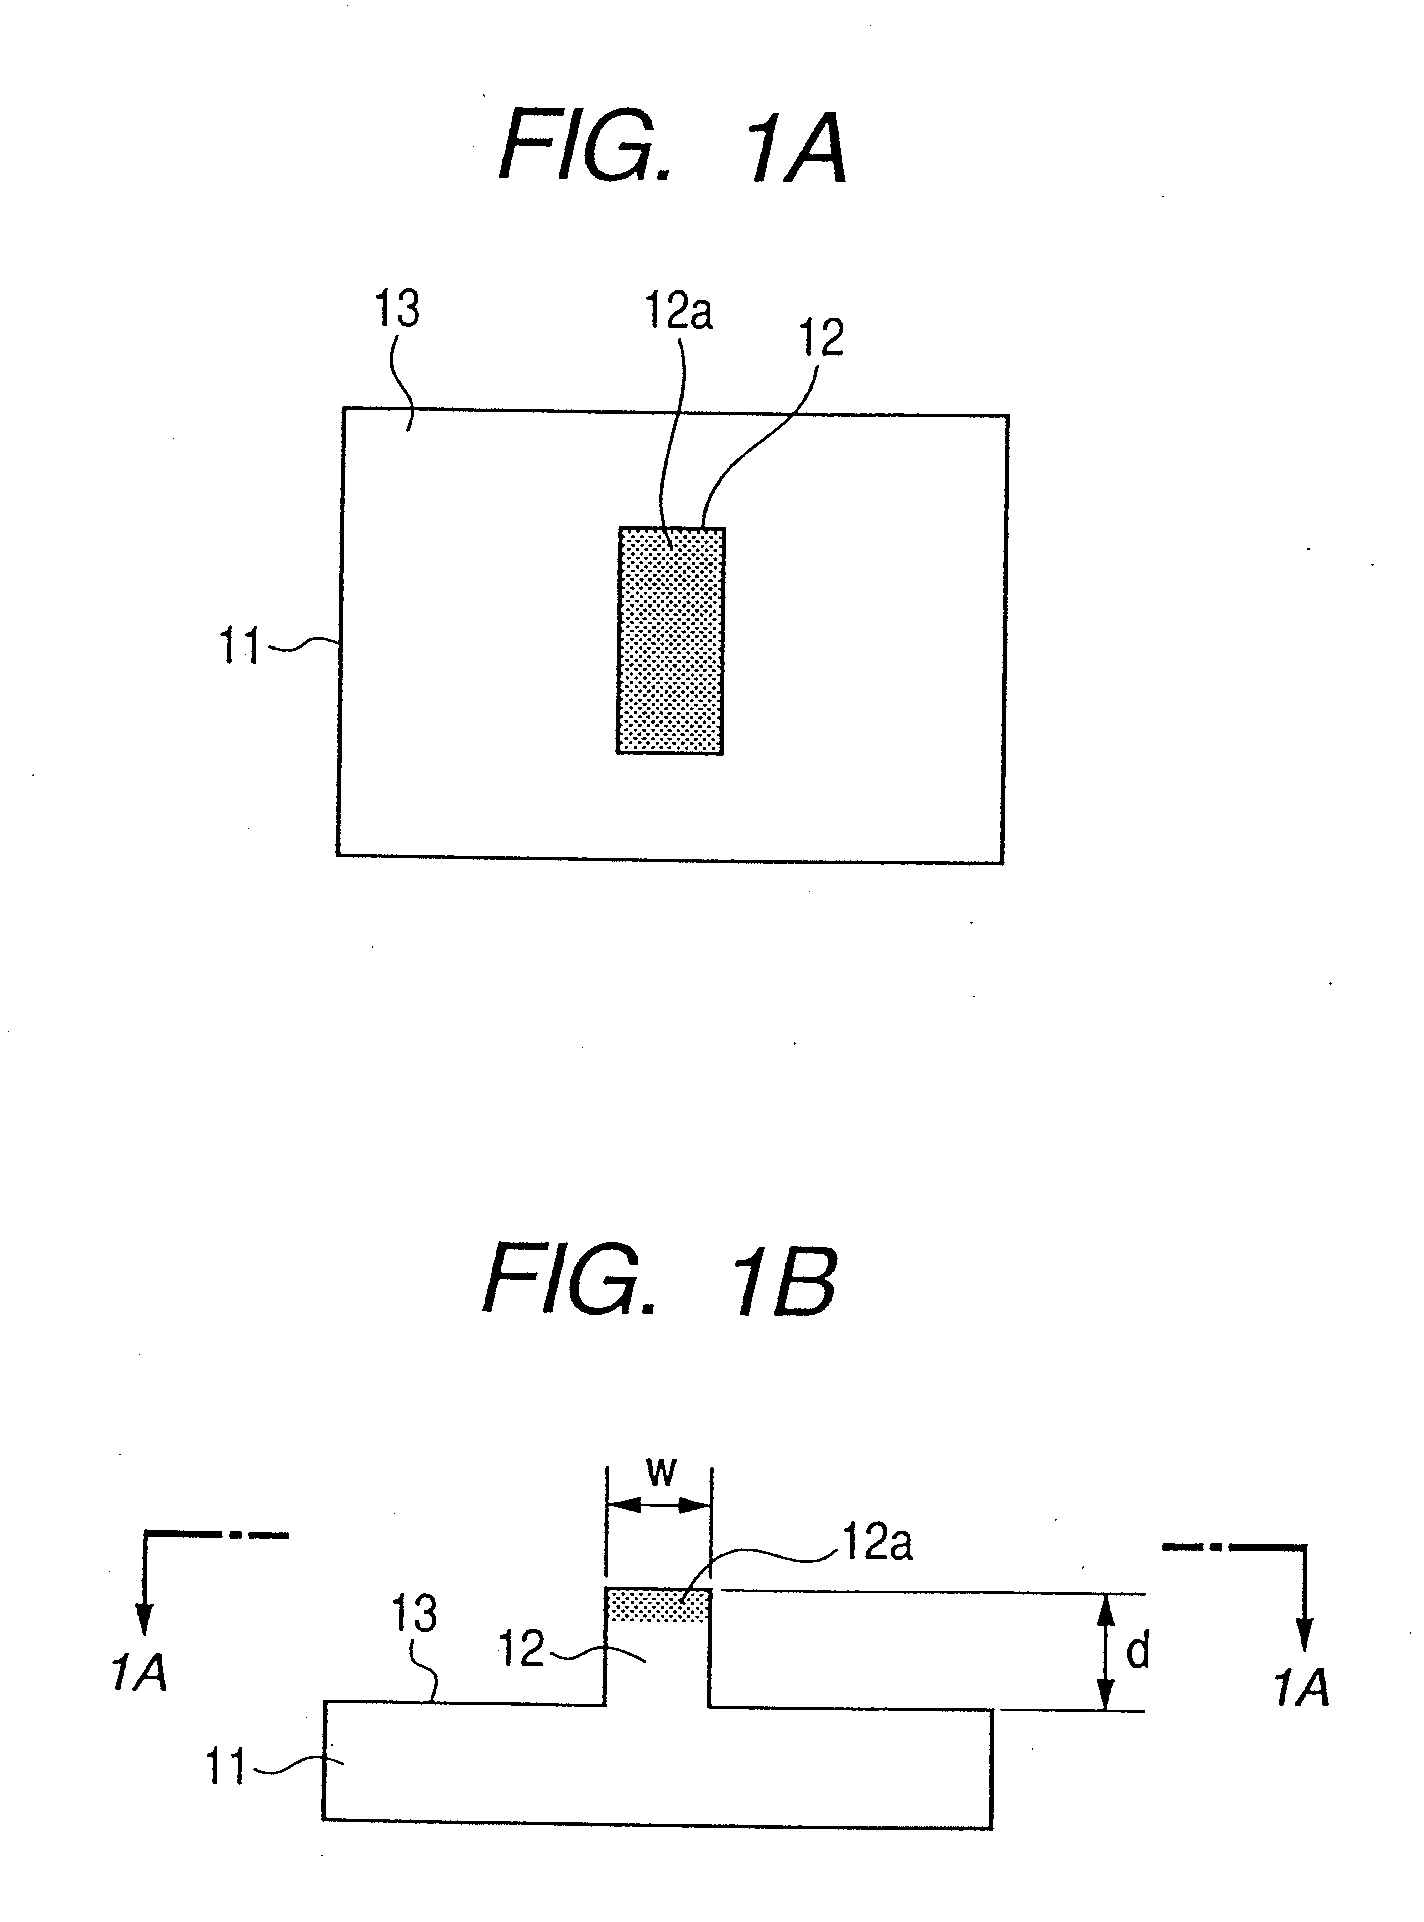 Method of Manufacturing A Nano Structure By Etching, Using A Substrate Containing Silicon